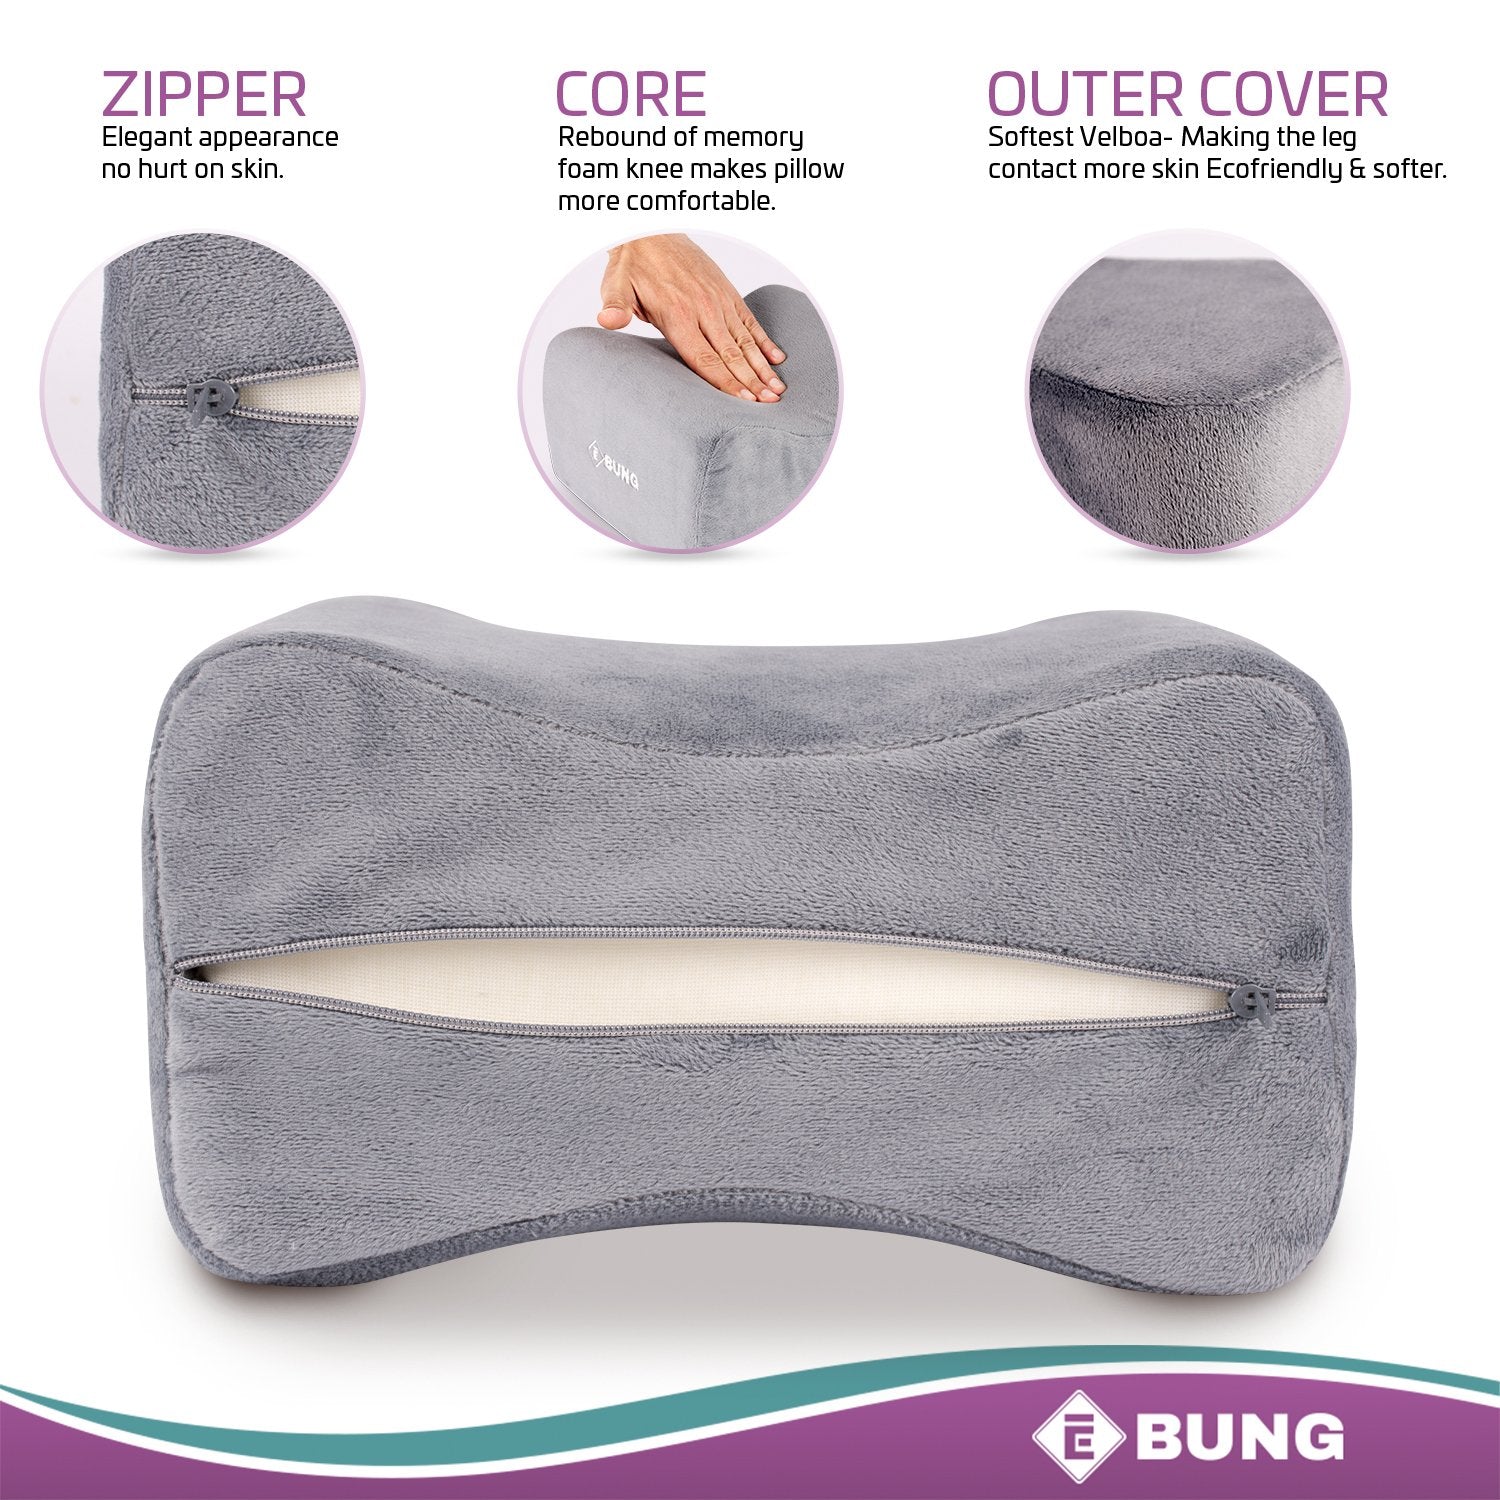 Knee Pillow & Leg Pillow for Hip, Back, Leg, Knee Pain Relief - Ideal for Side Sleepers, Pregnancy and Right Spine Alignment a?��Memory Foam Wedge Contour with Washable Cover  - Like New